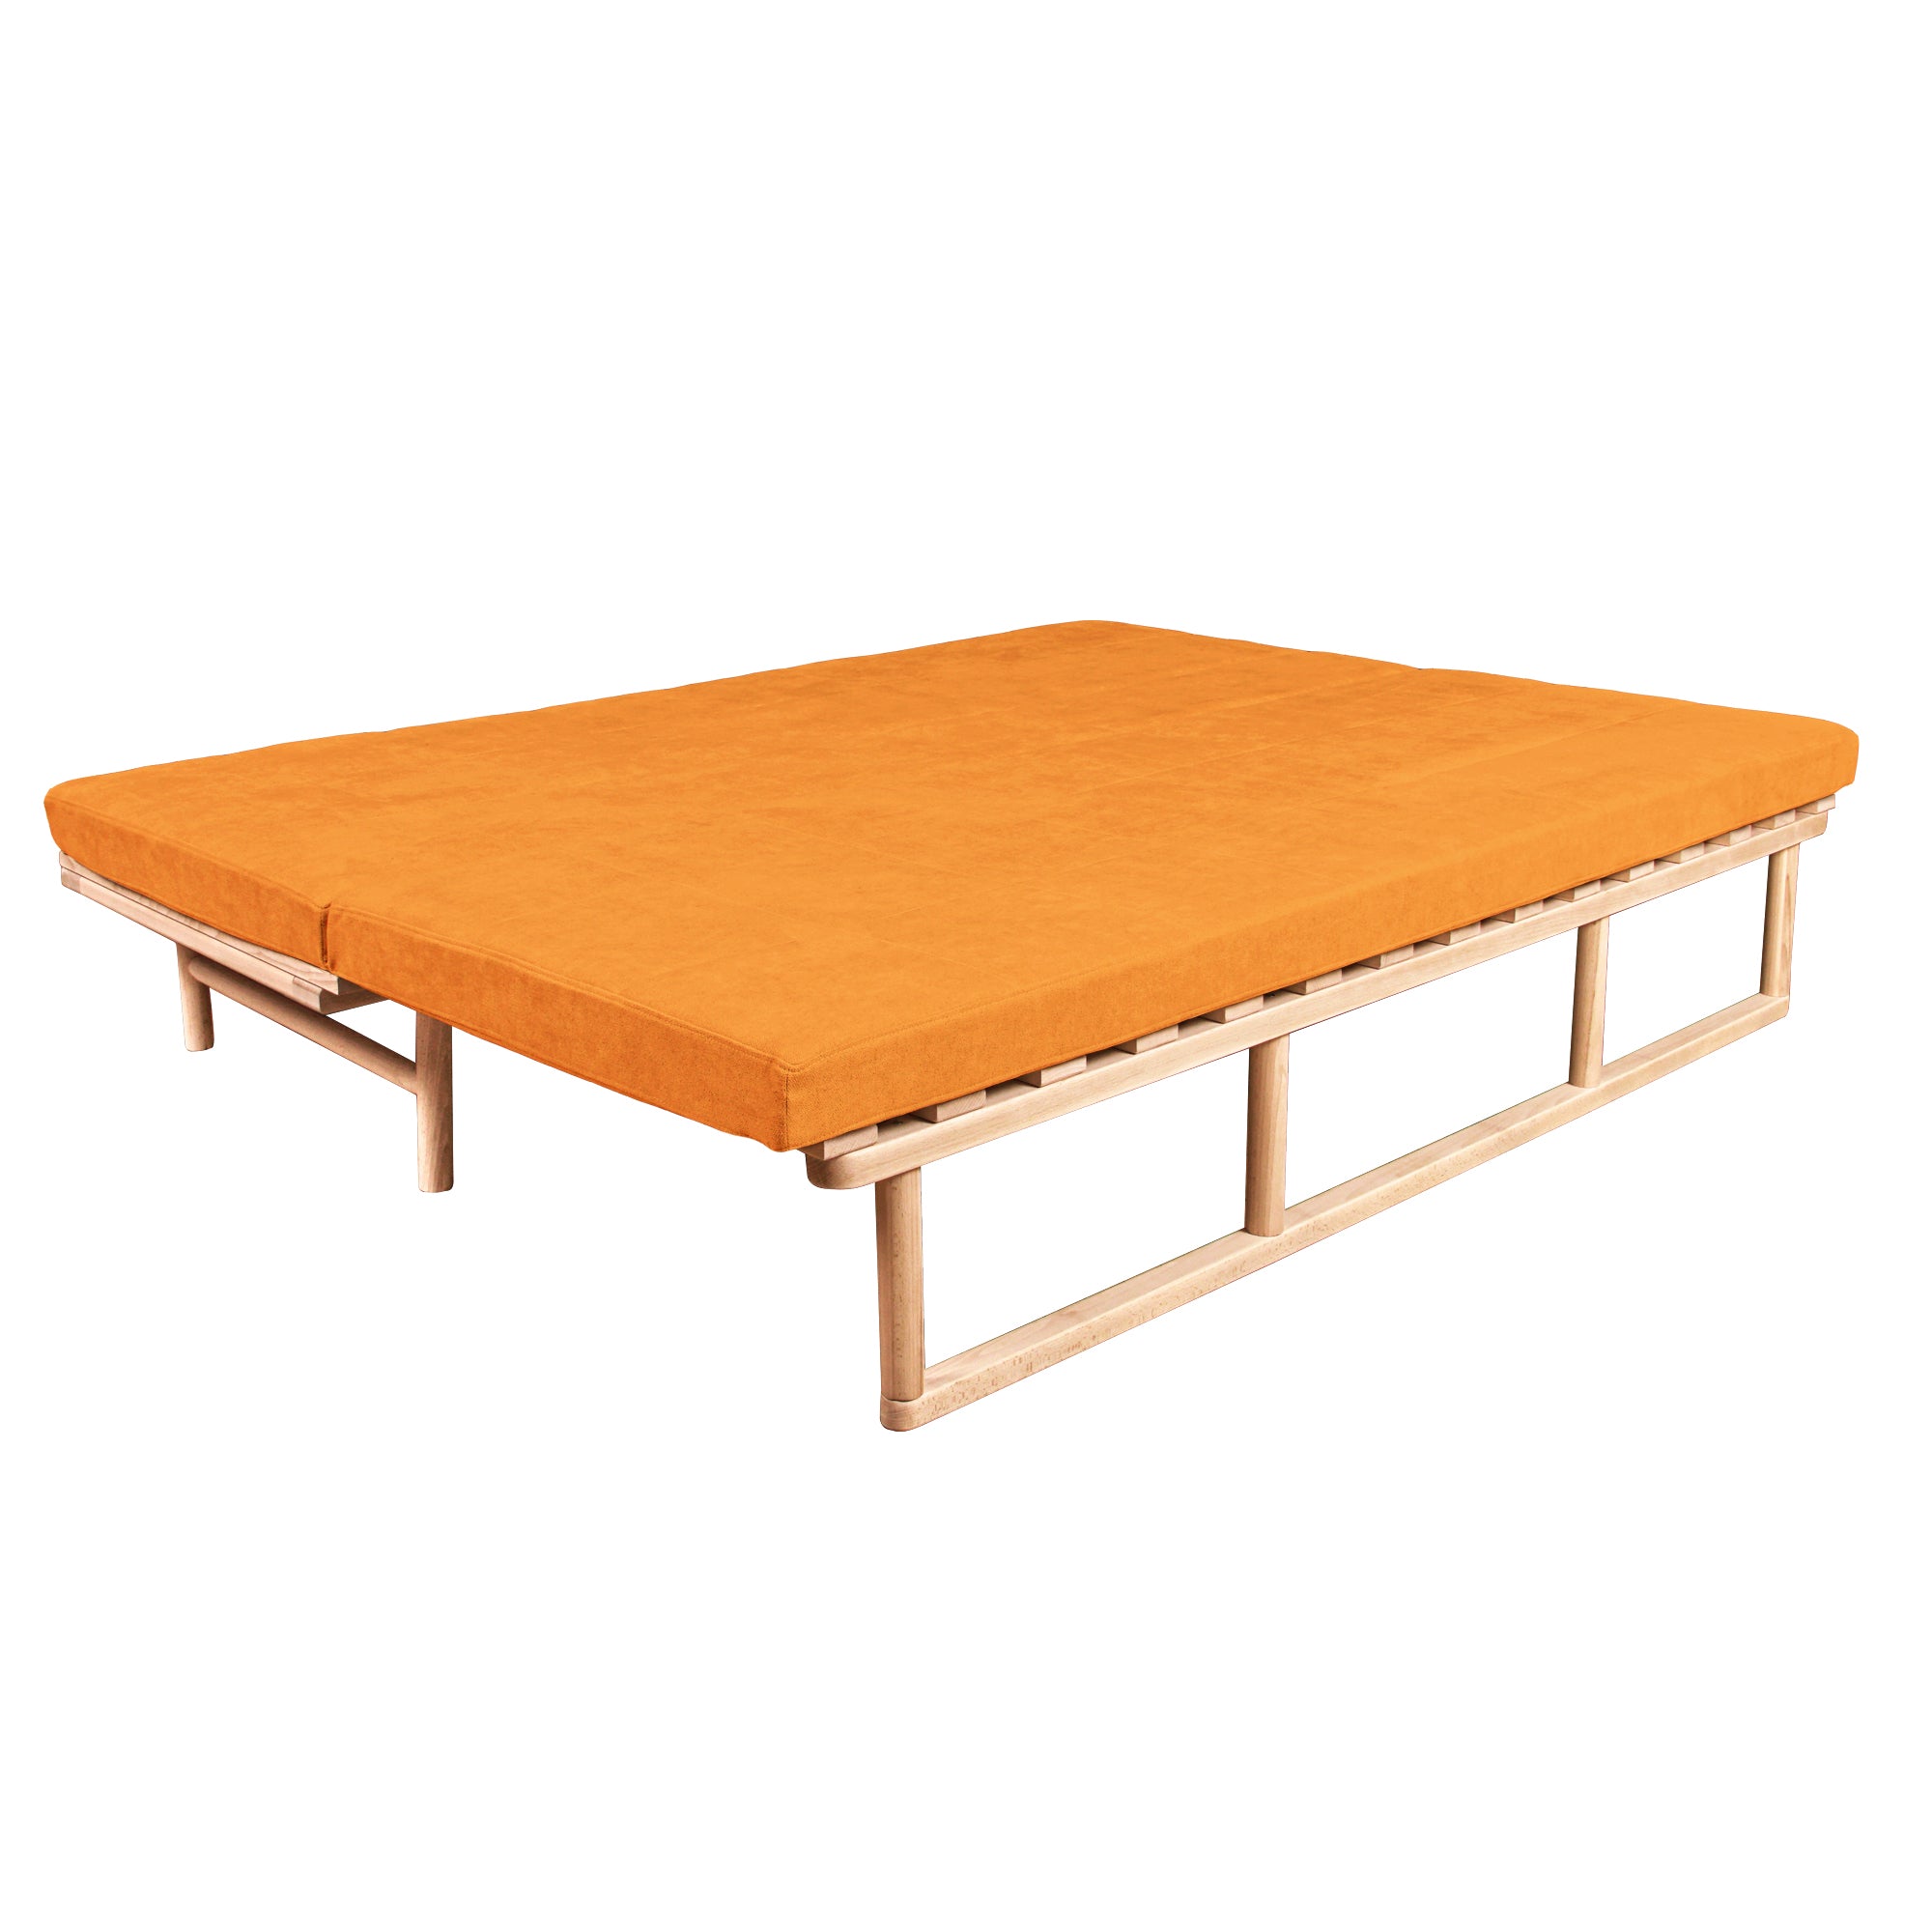 Le MAR Folding Daybed, Beech Wood Frame, Natural Colour-upholstery orange-folded view